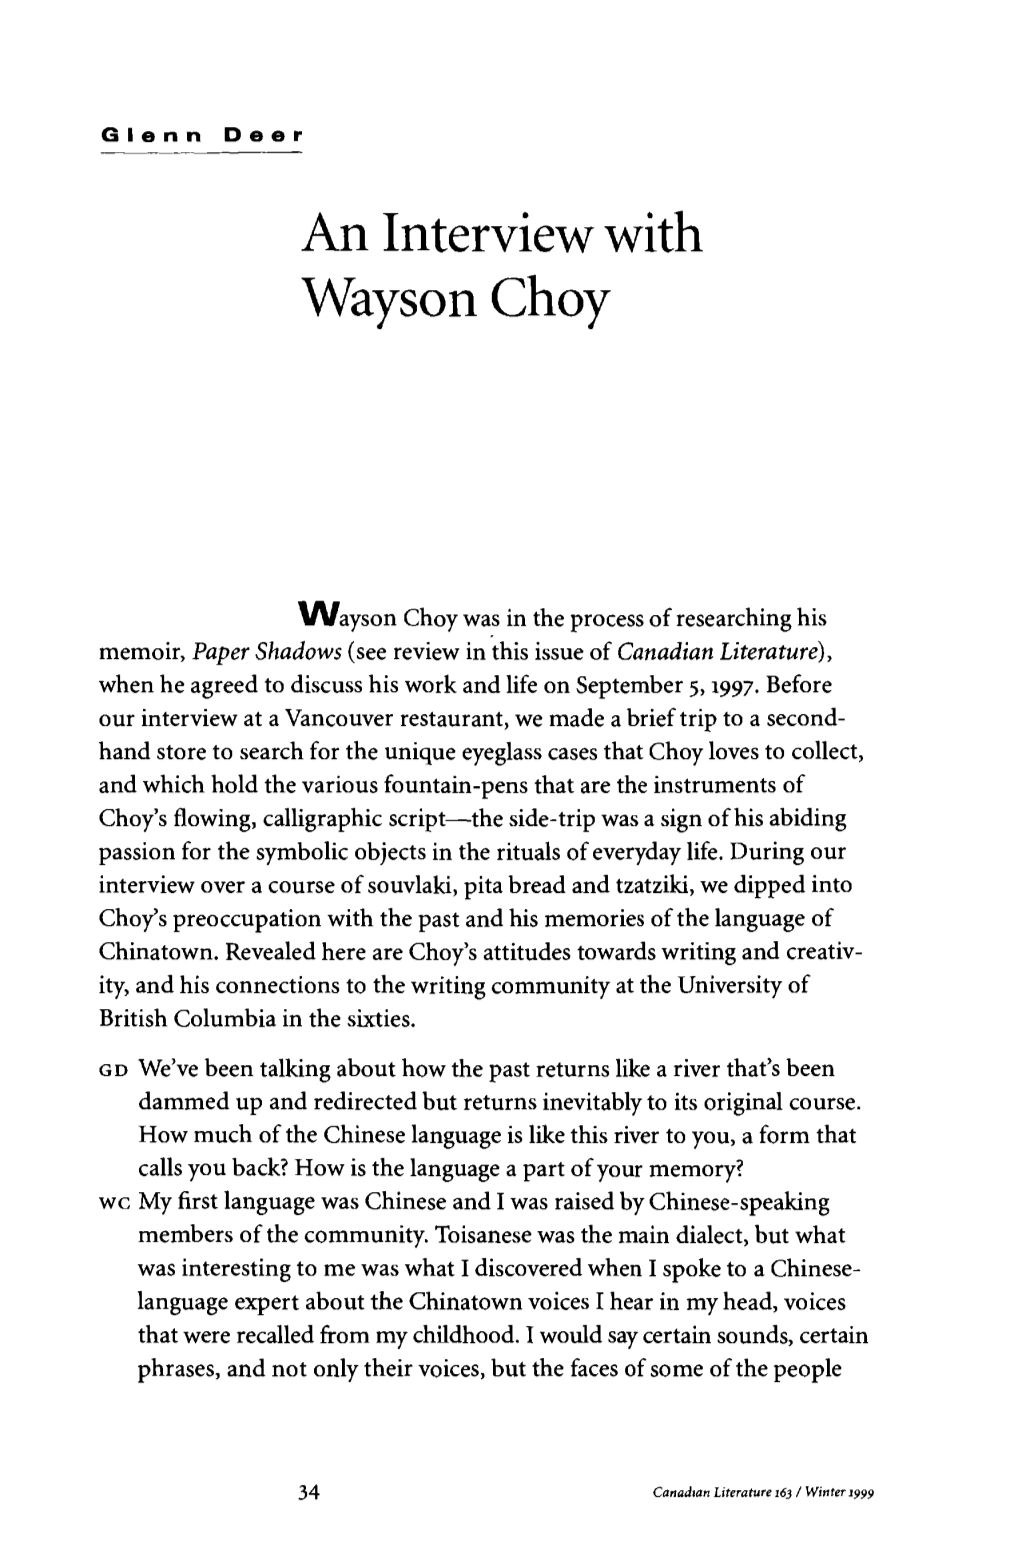 An Interview with Wayson Choy